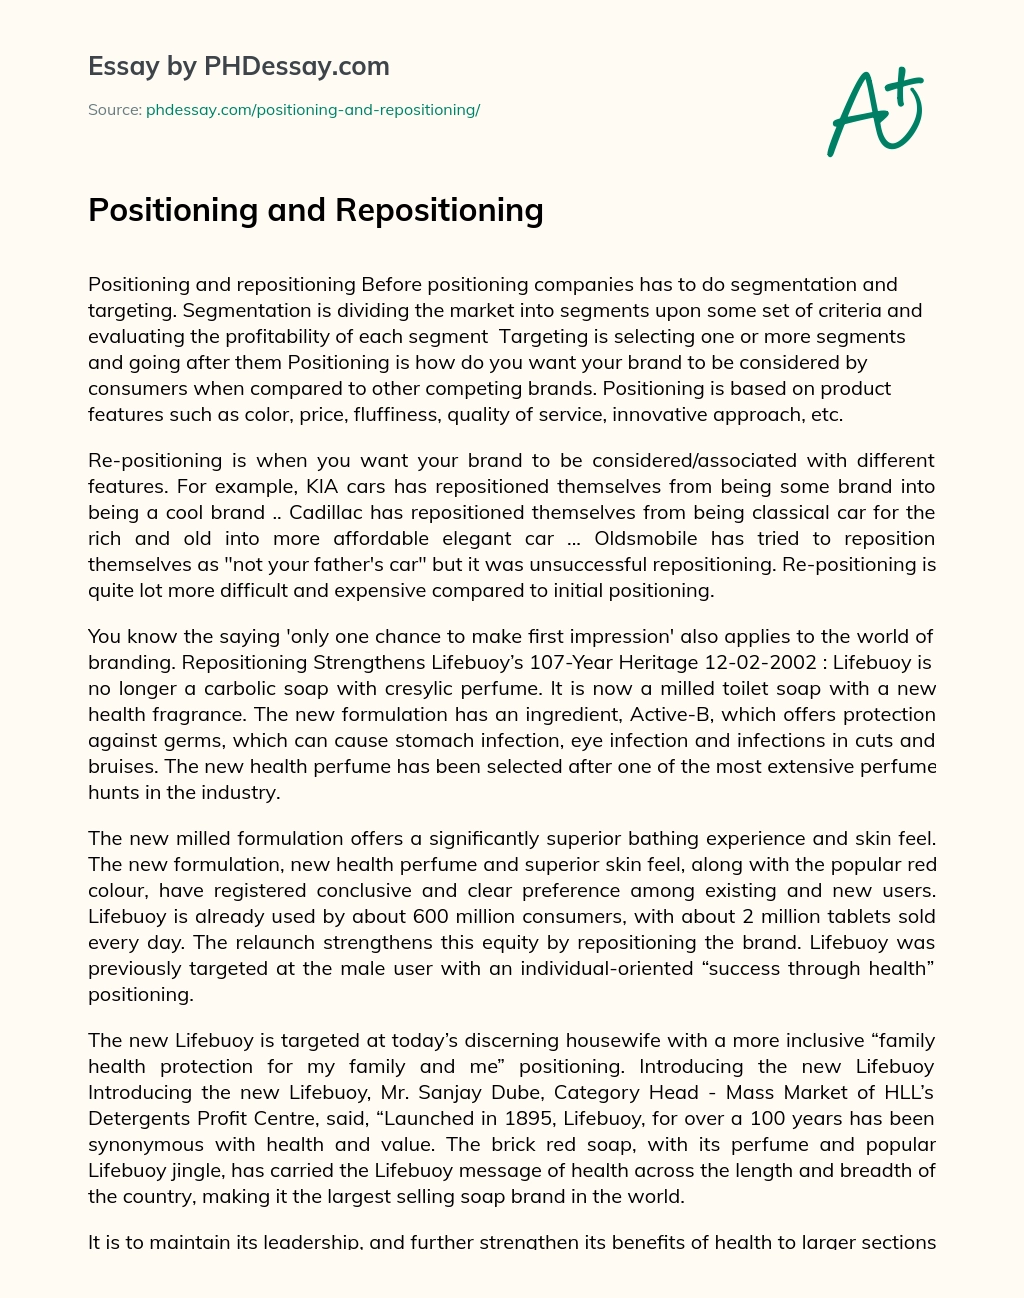 Positioning and Repositioning essay